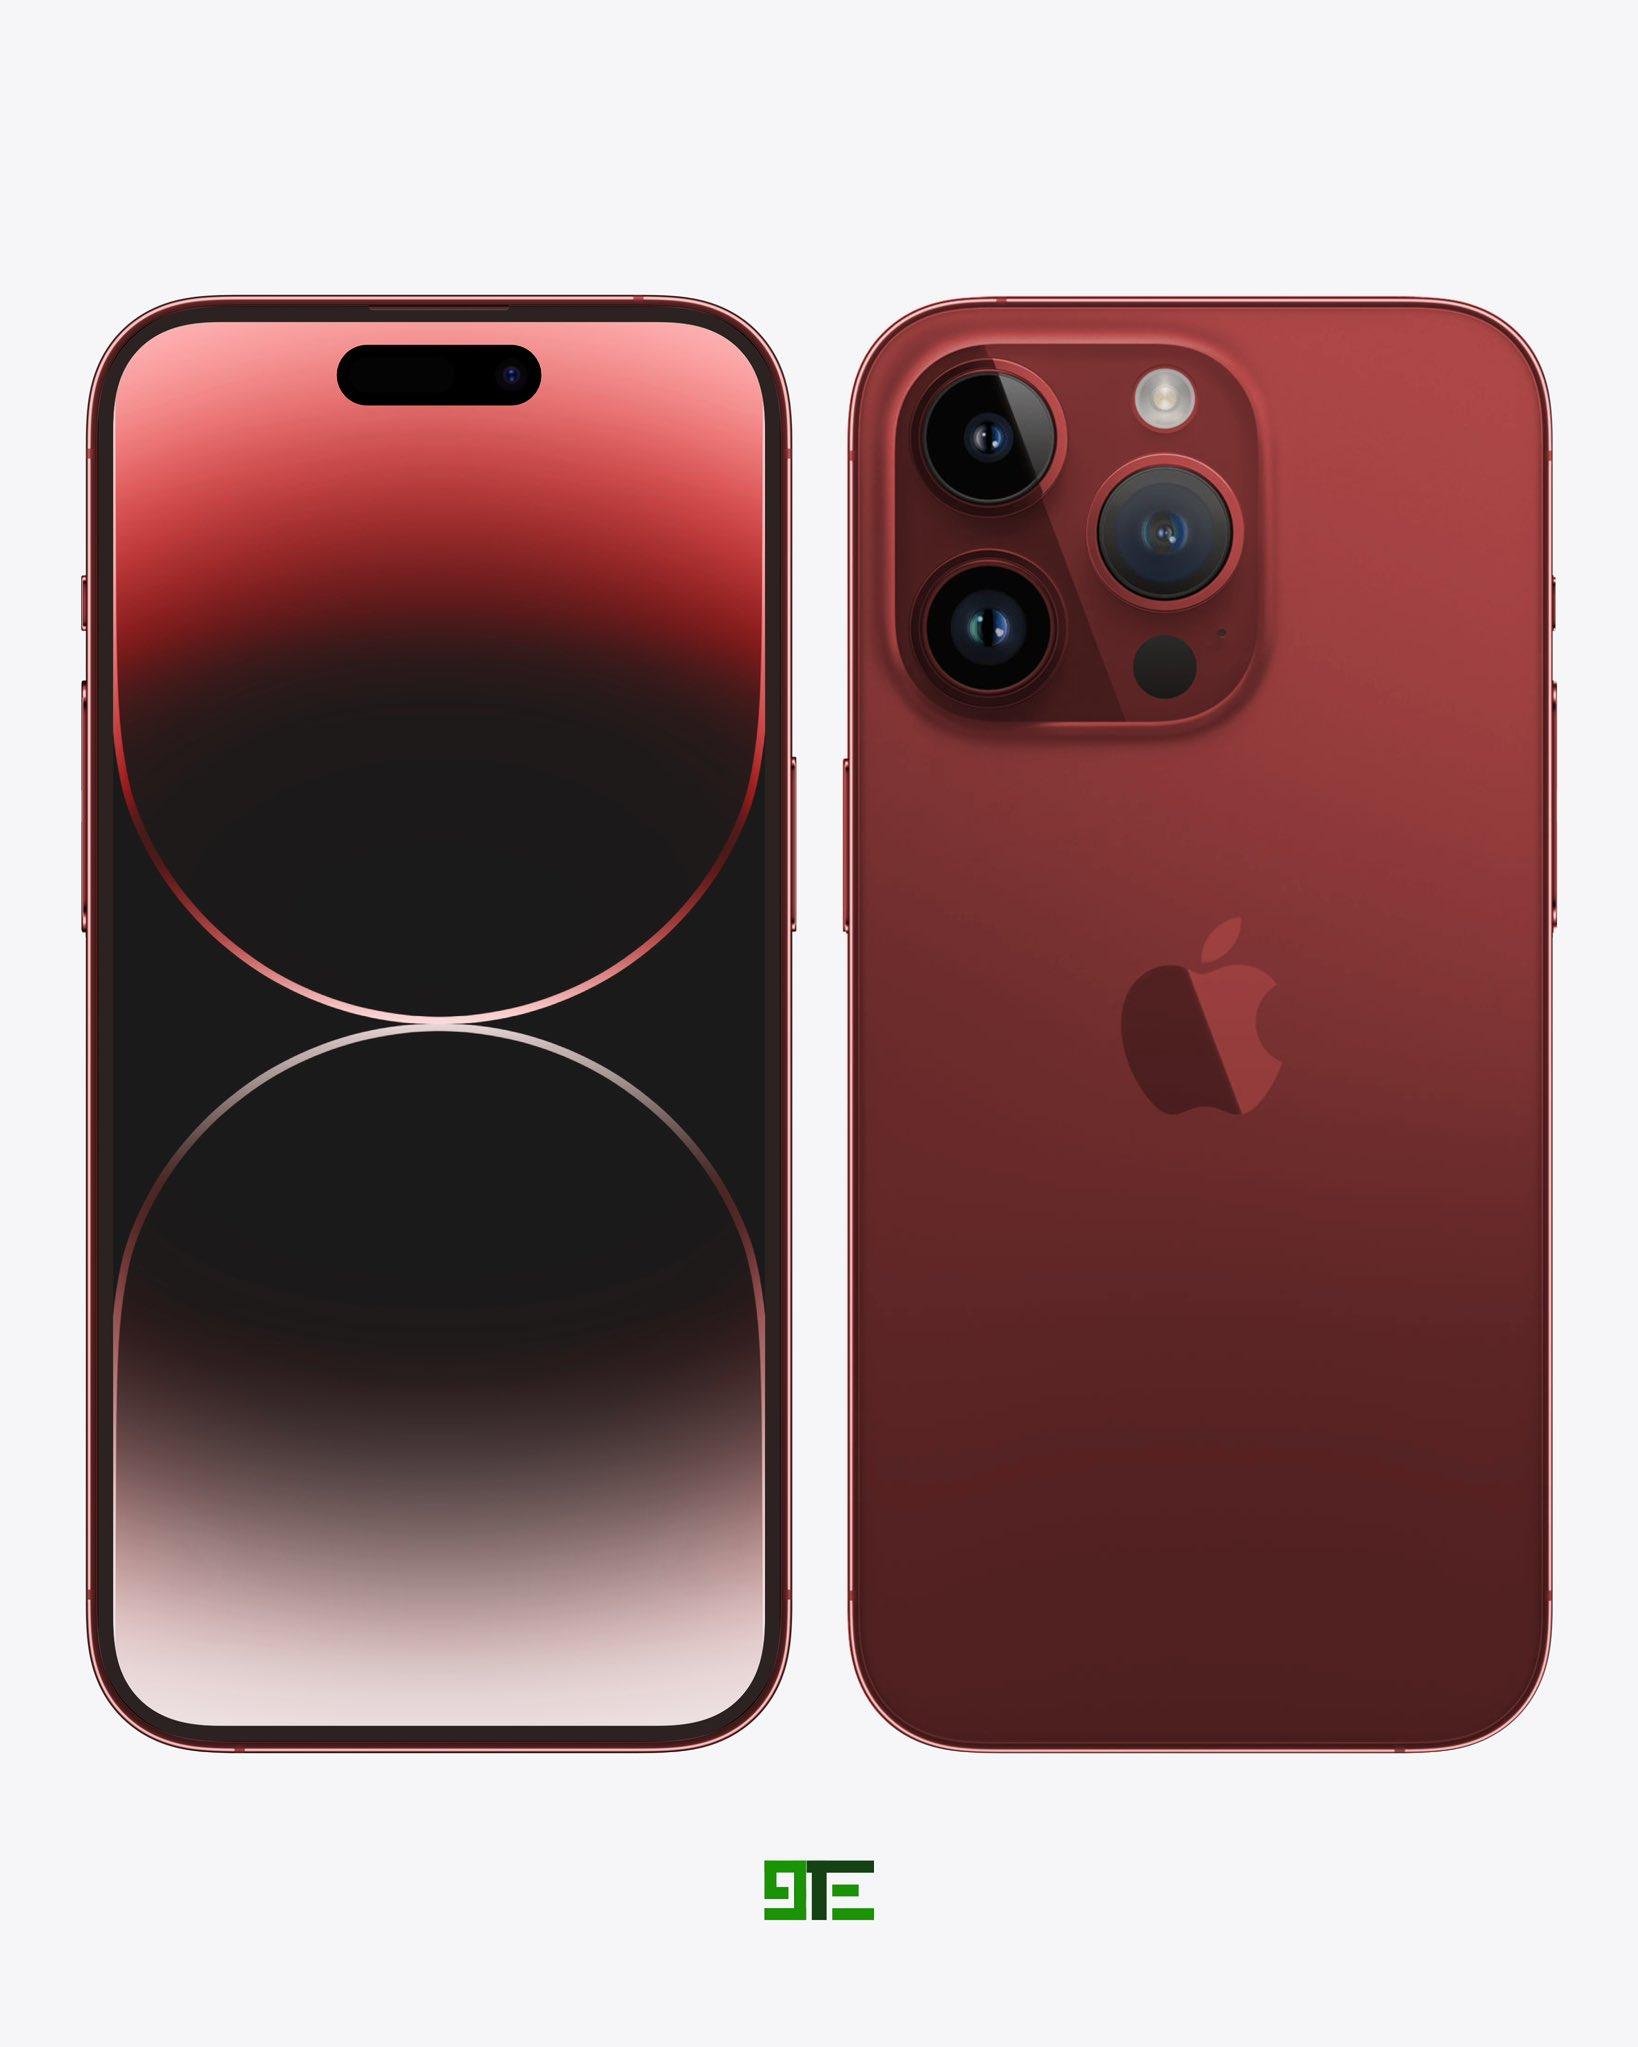 9TechEleven on X iPhone Pro could be released in Red finish